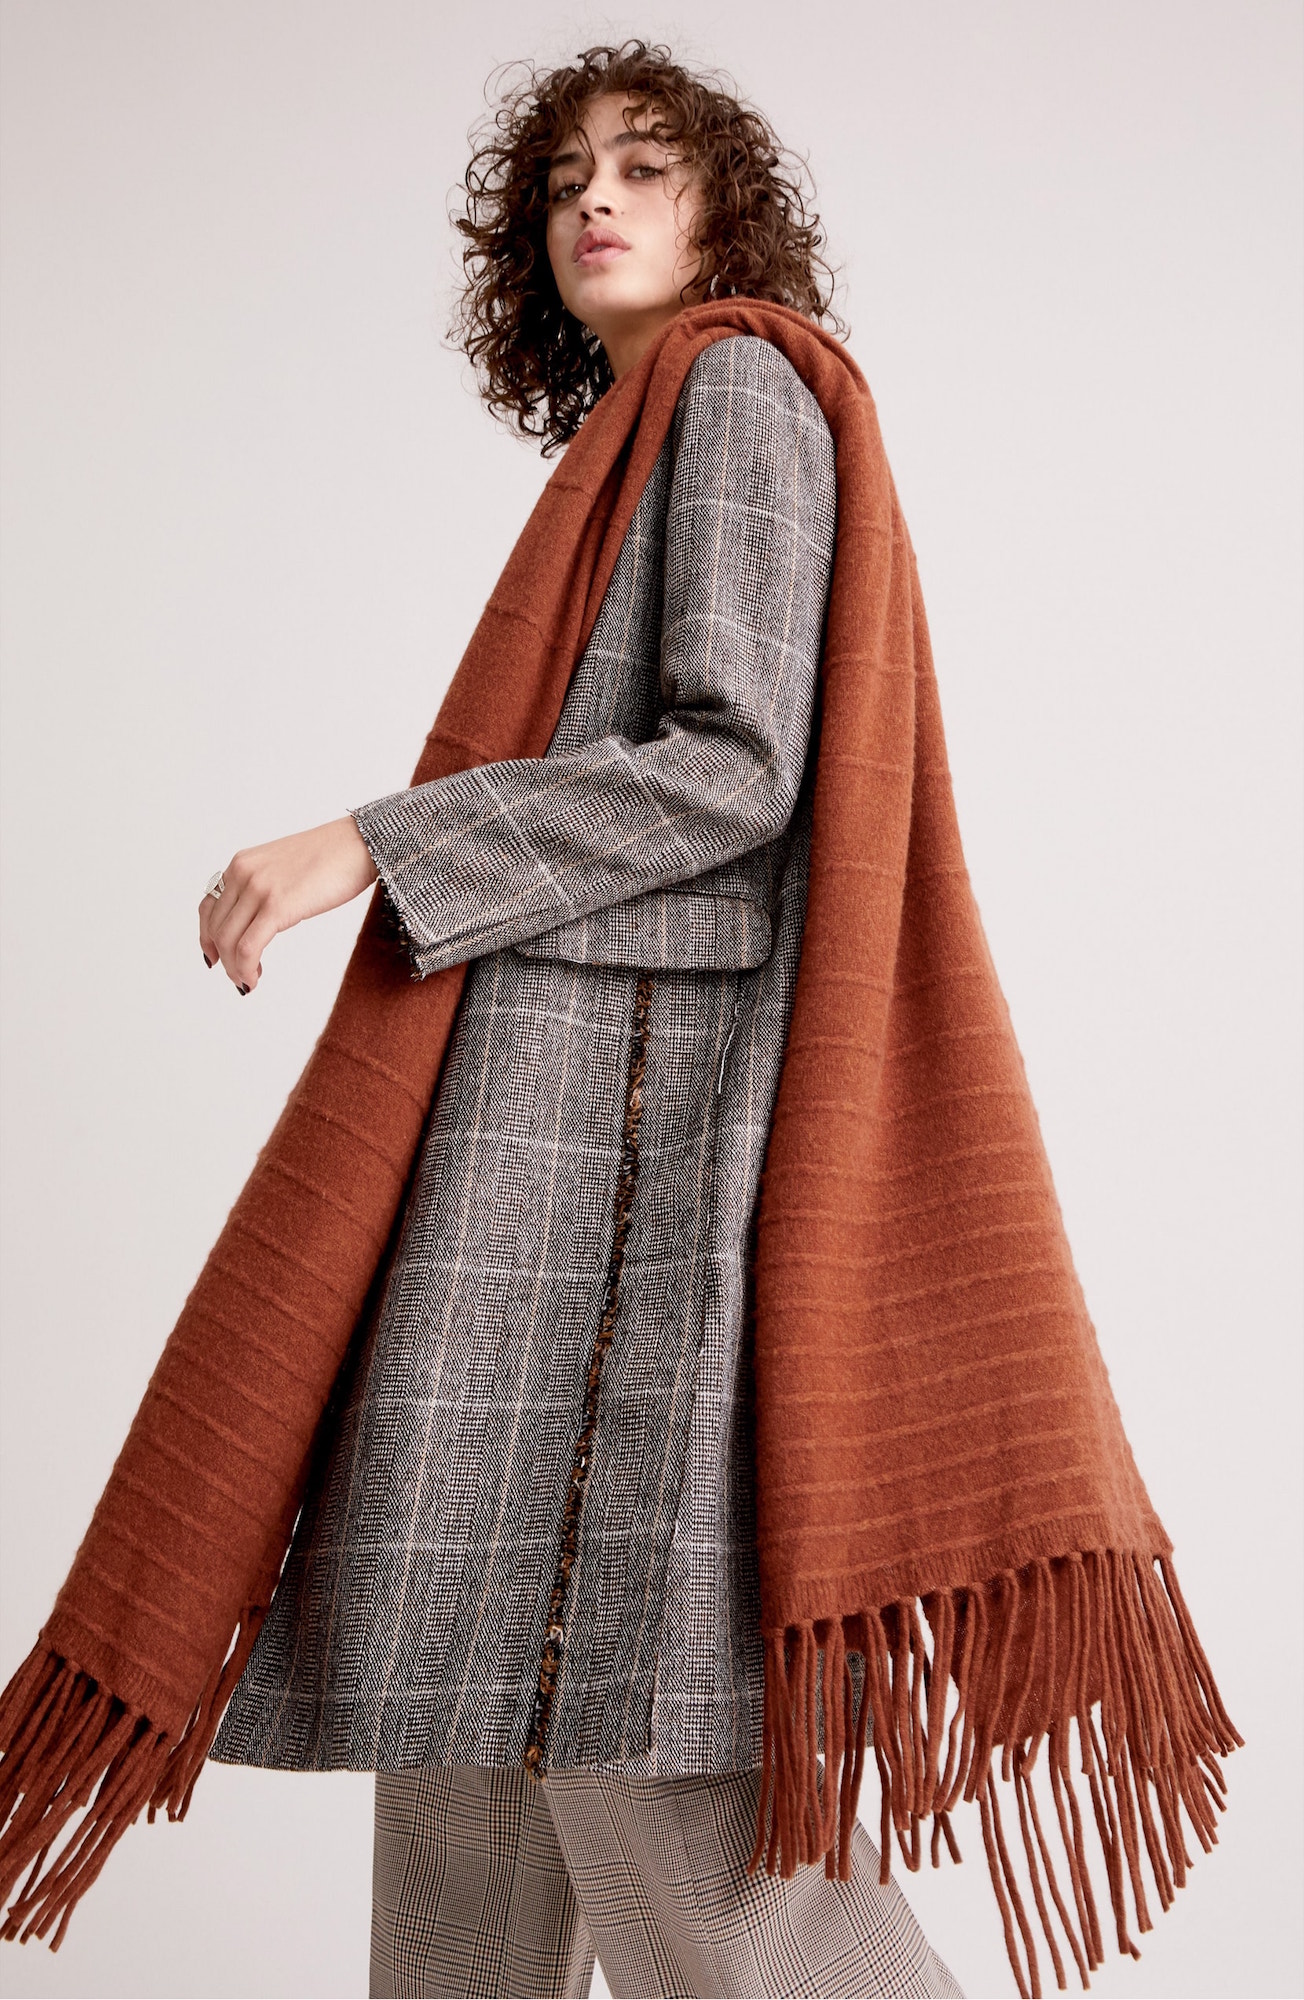 Stock Up on Your Fall Knits With a Cozy Cashmere Wrap